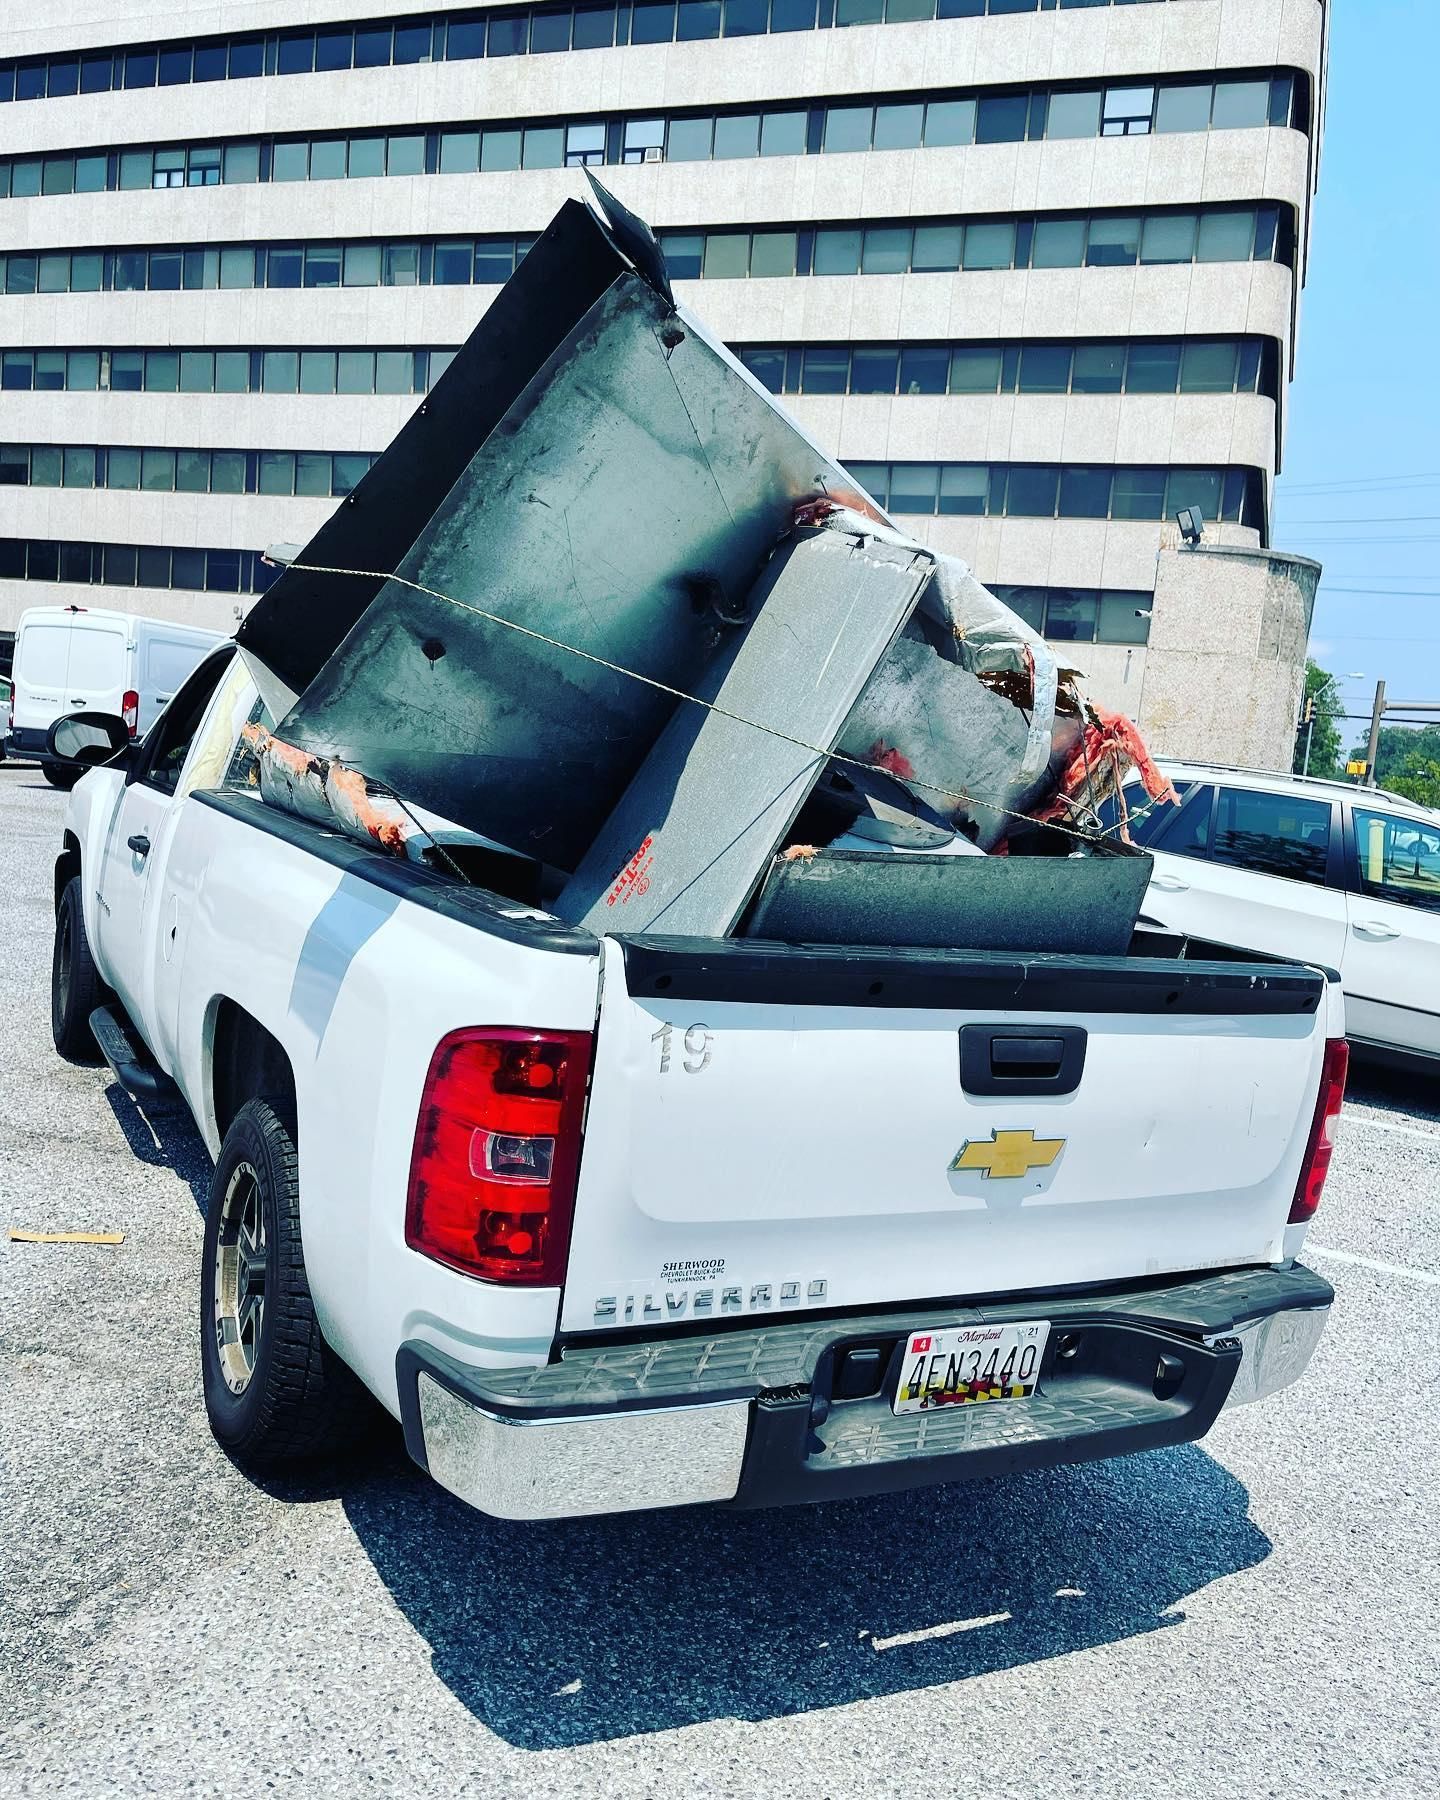 All Photos for Junk Removal Trash Removal Hauling & Donation Moma Services in Baltimore, MD